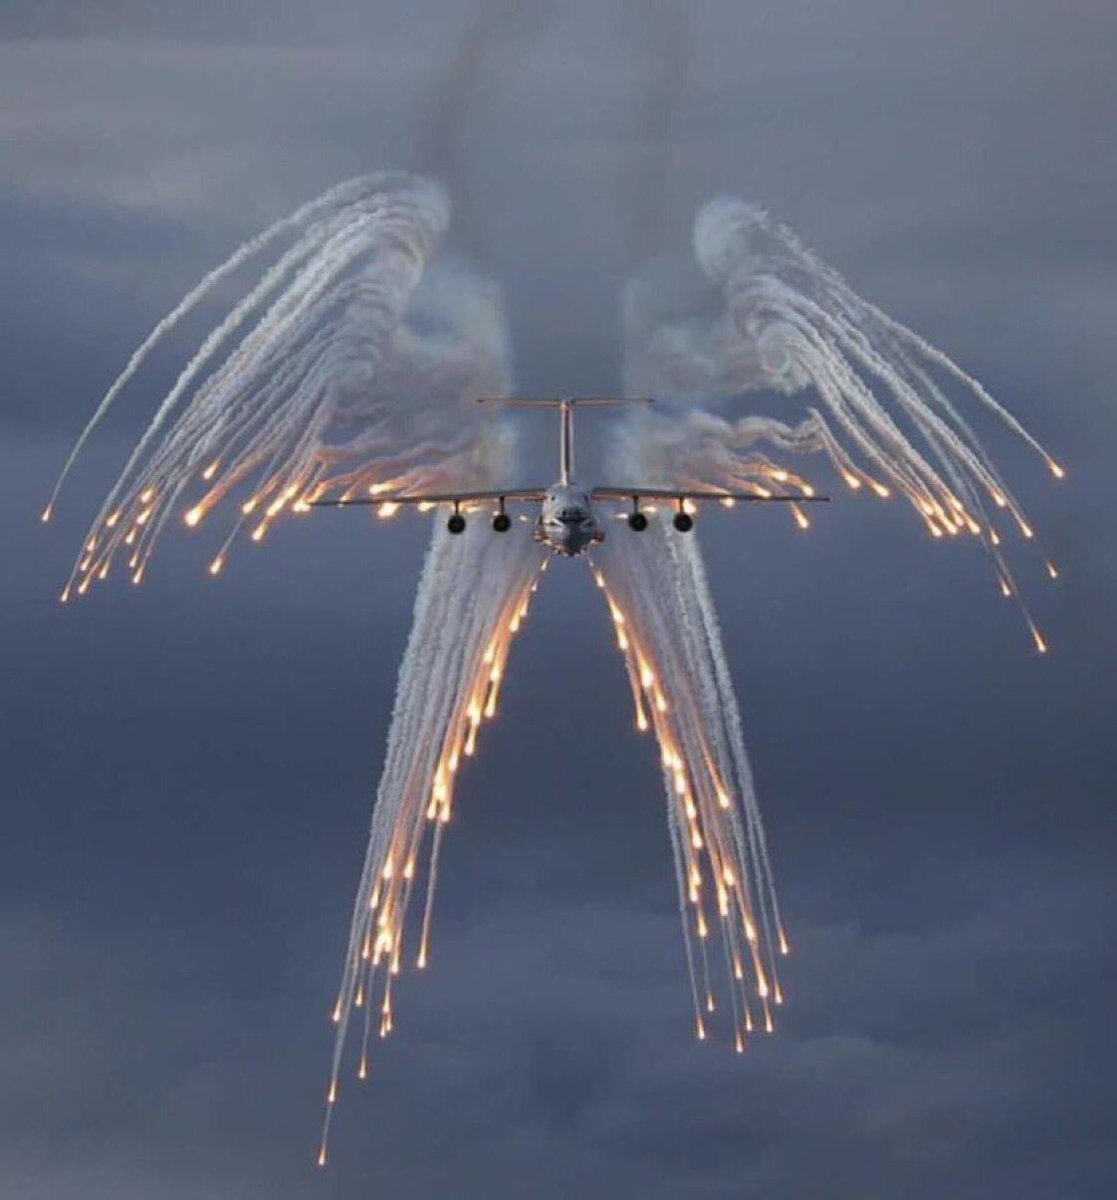 The #USAirForce uses the call sign Angel Flight for the planes carrying our #FallenHeroes 🇺🇸 The flare Salute looks like Angel Wings. Today we remember all those who’ve been carried on #AngelFlights & those who’ve been lost on the battlefield #MemorialDay